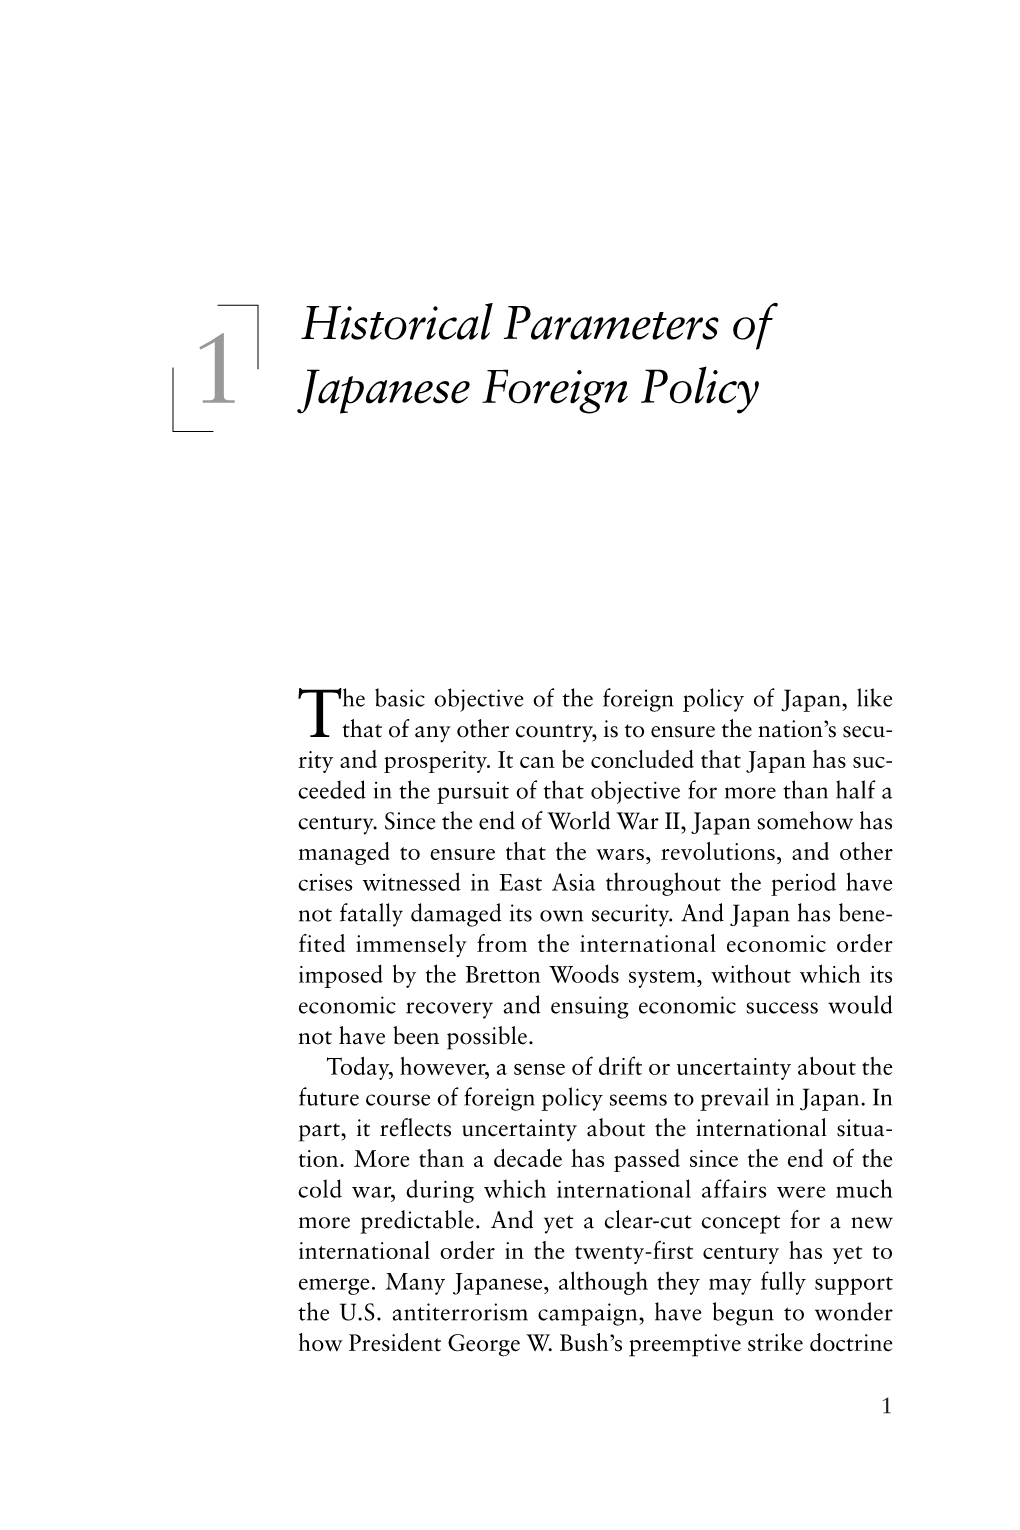 The Basic Objective of the Foreign Policy of Japan, Like